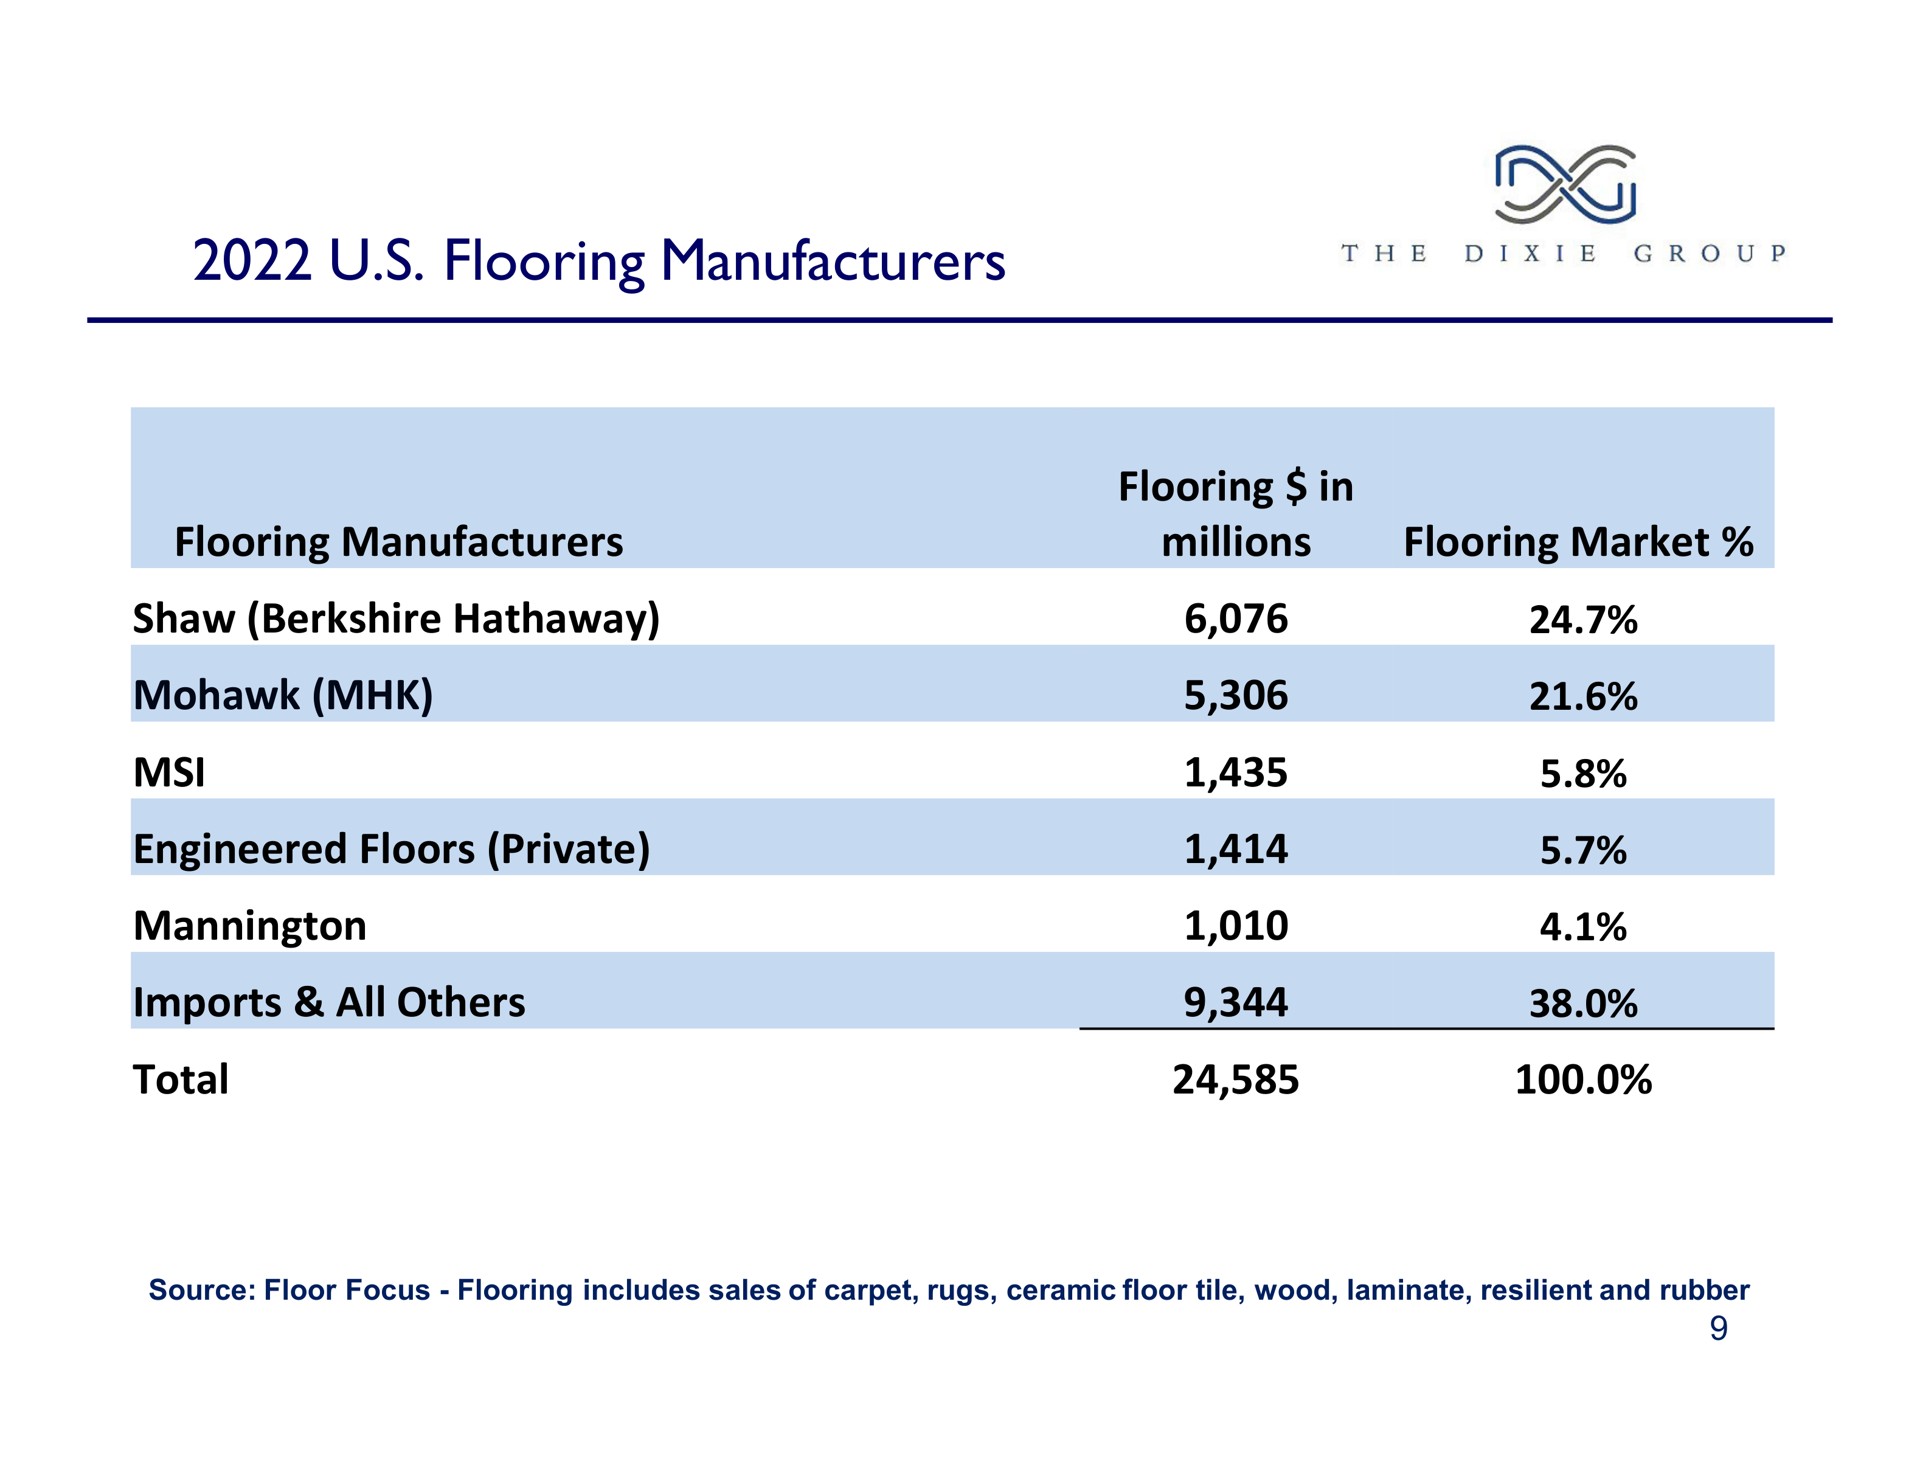 flooring manufacturers sees | The Dixie Group